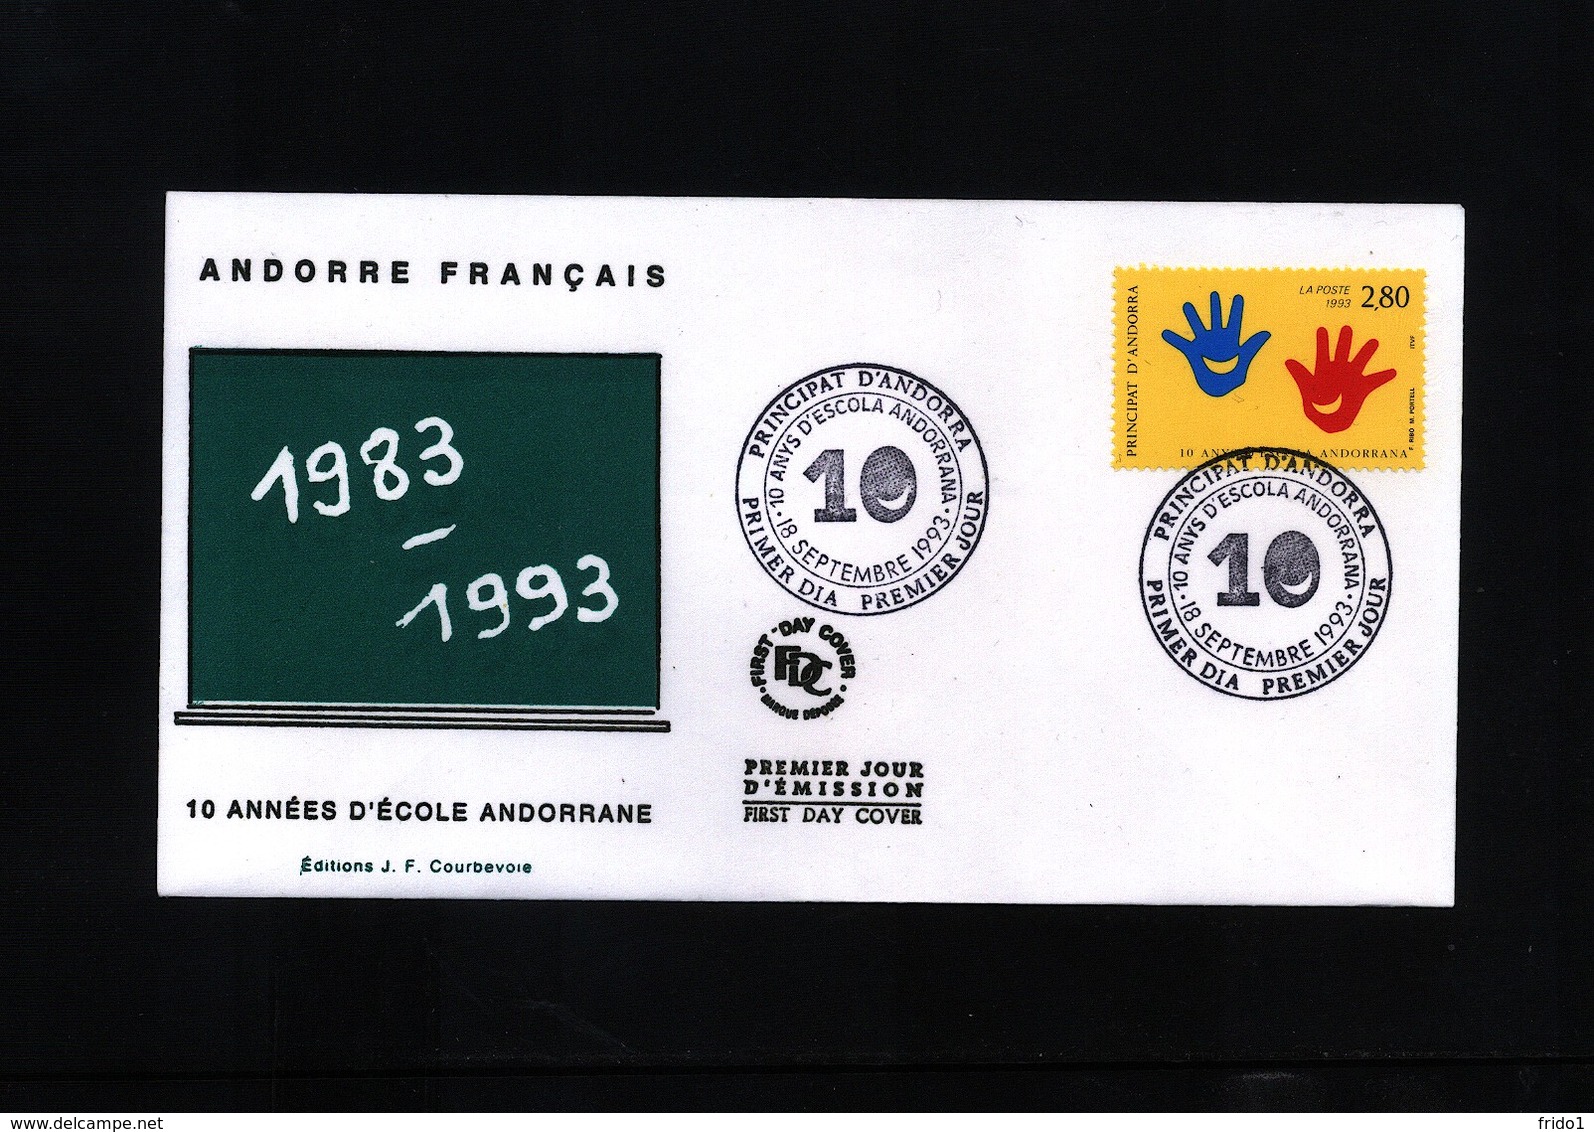 Andorra French 1993 Michel 459 FDC - Lettres & Documents